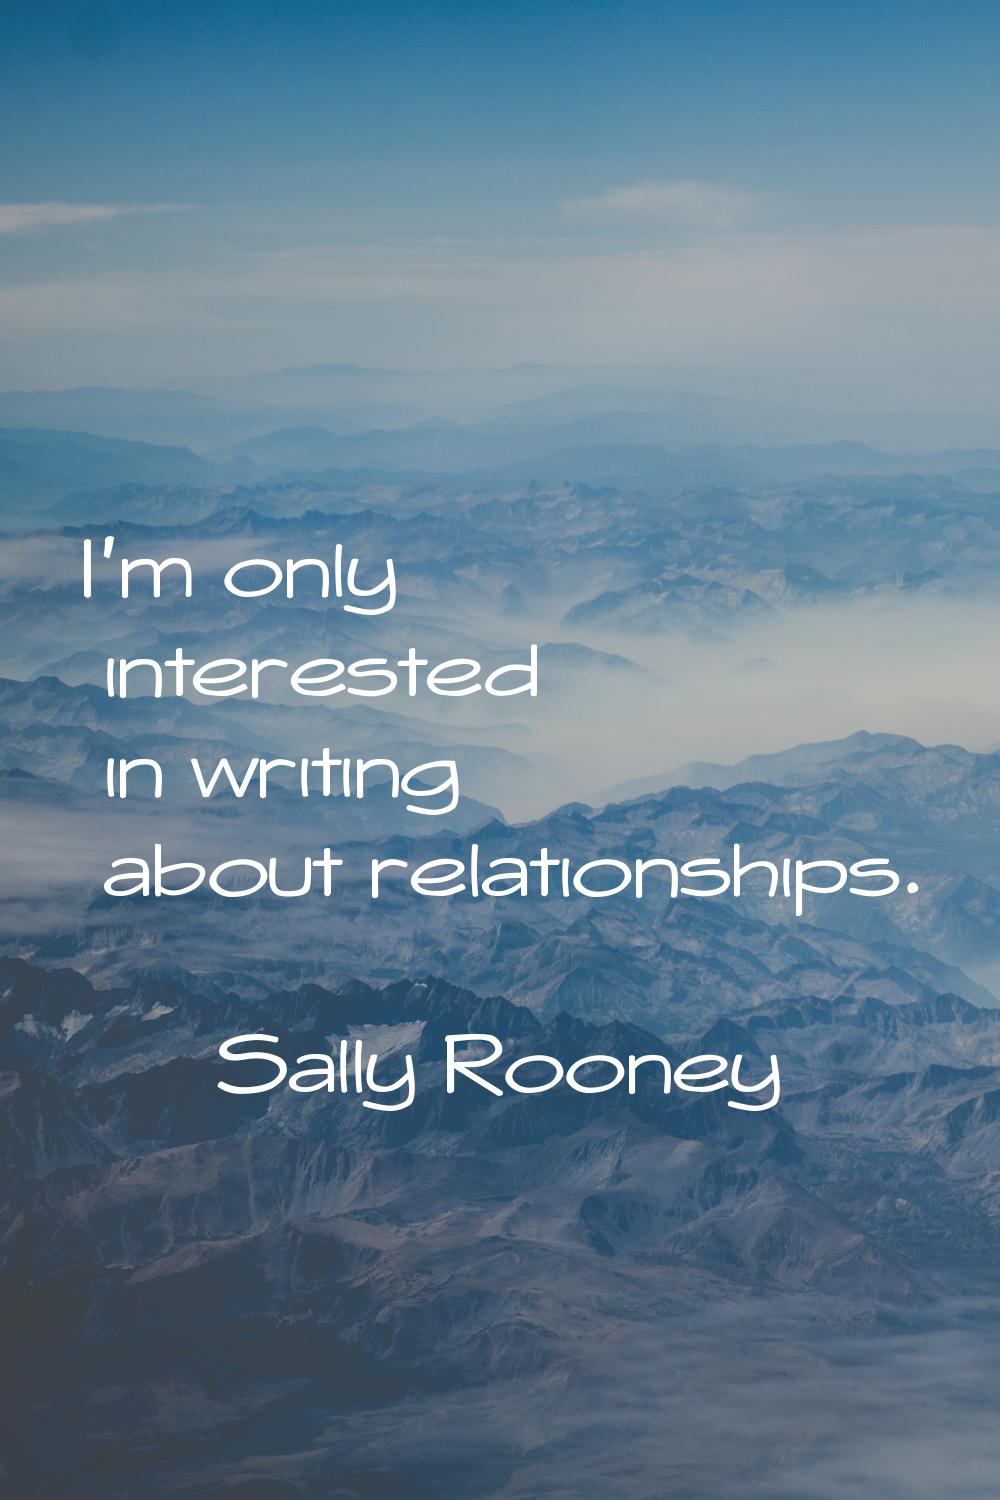 I'm only interested in writing about relationships.